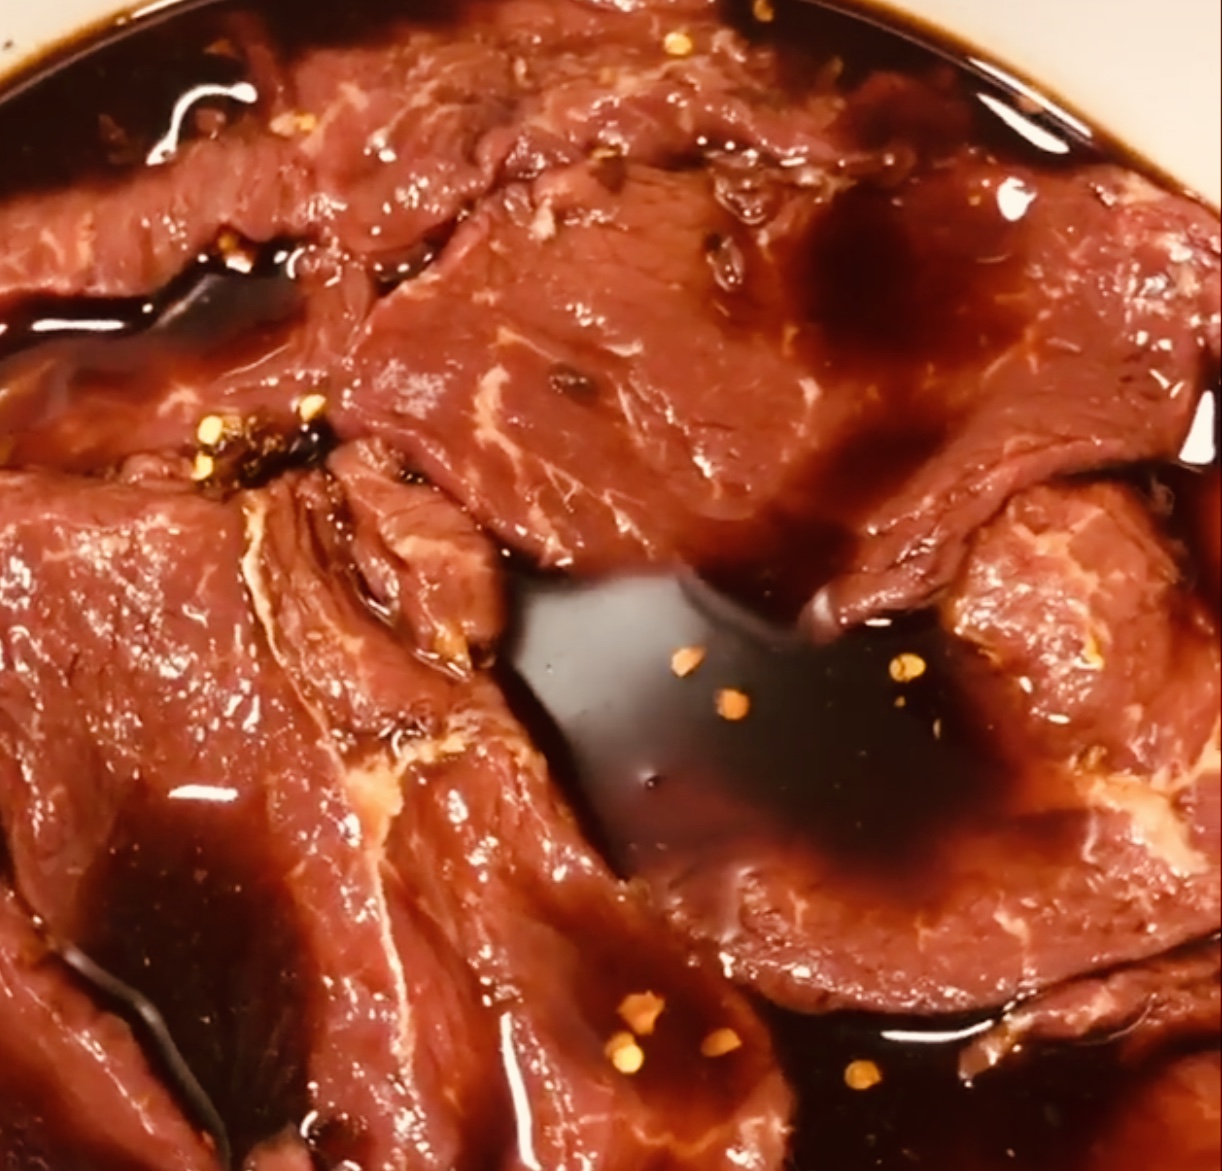 Delicious Cider Soy Marinade with Bourbon Whisky